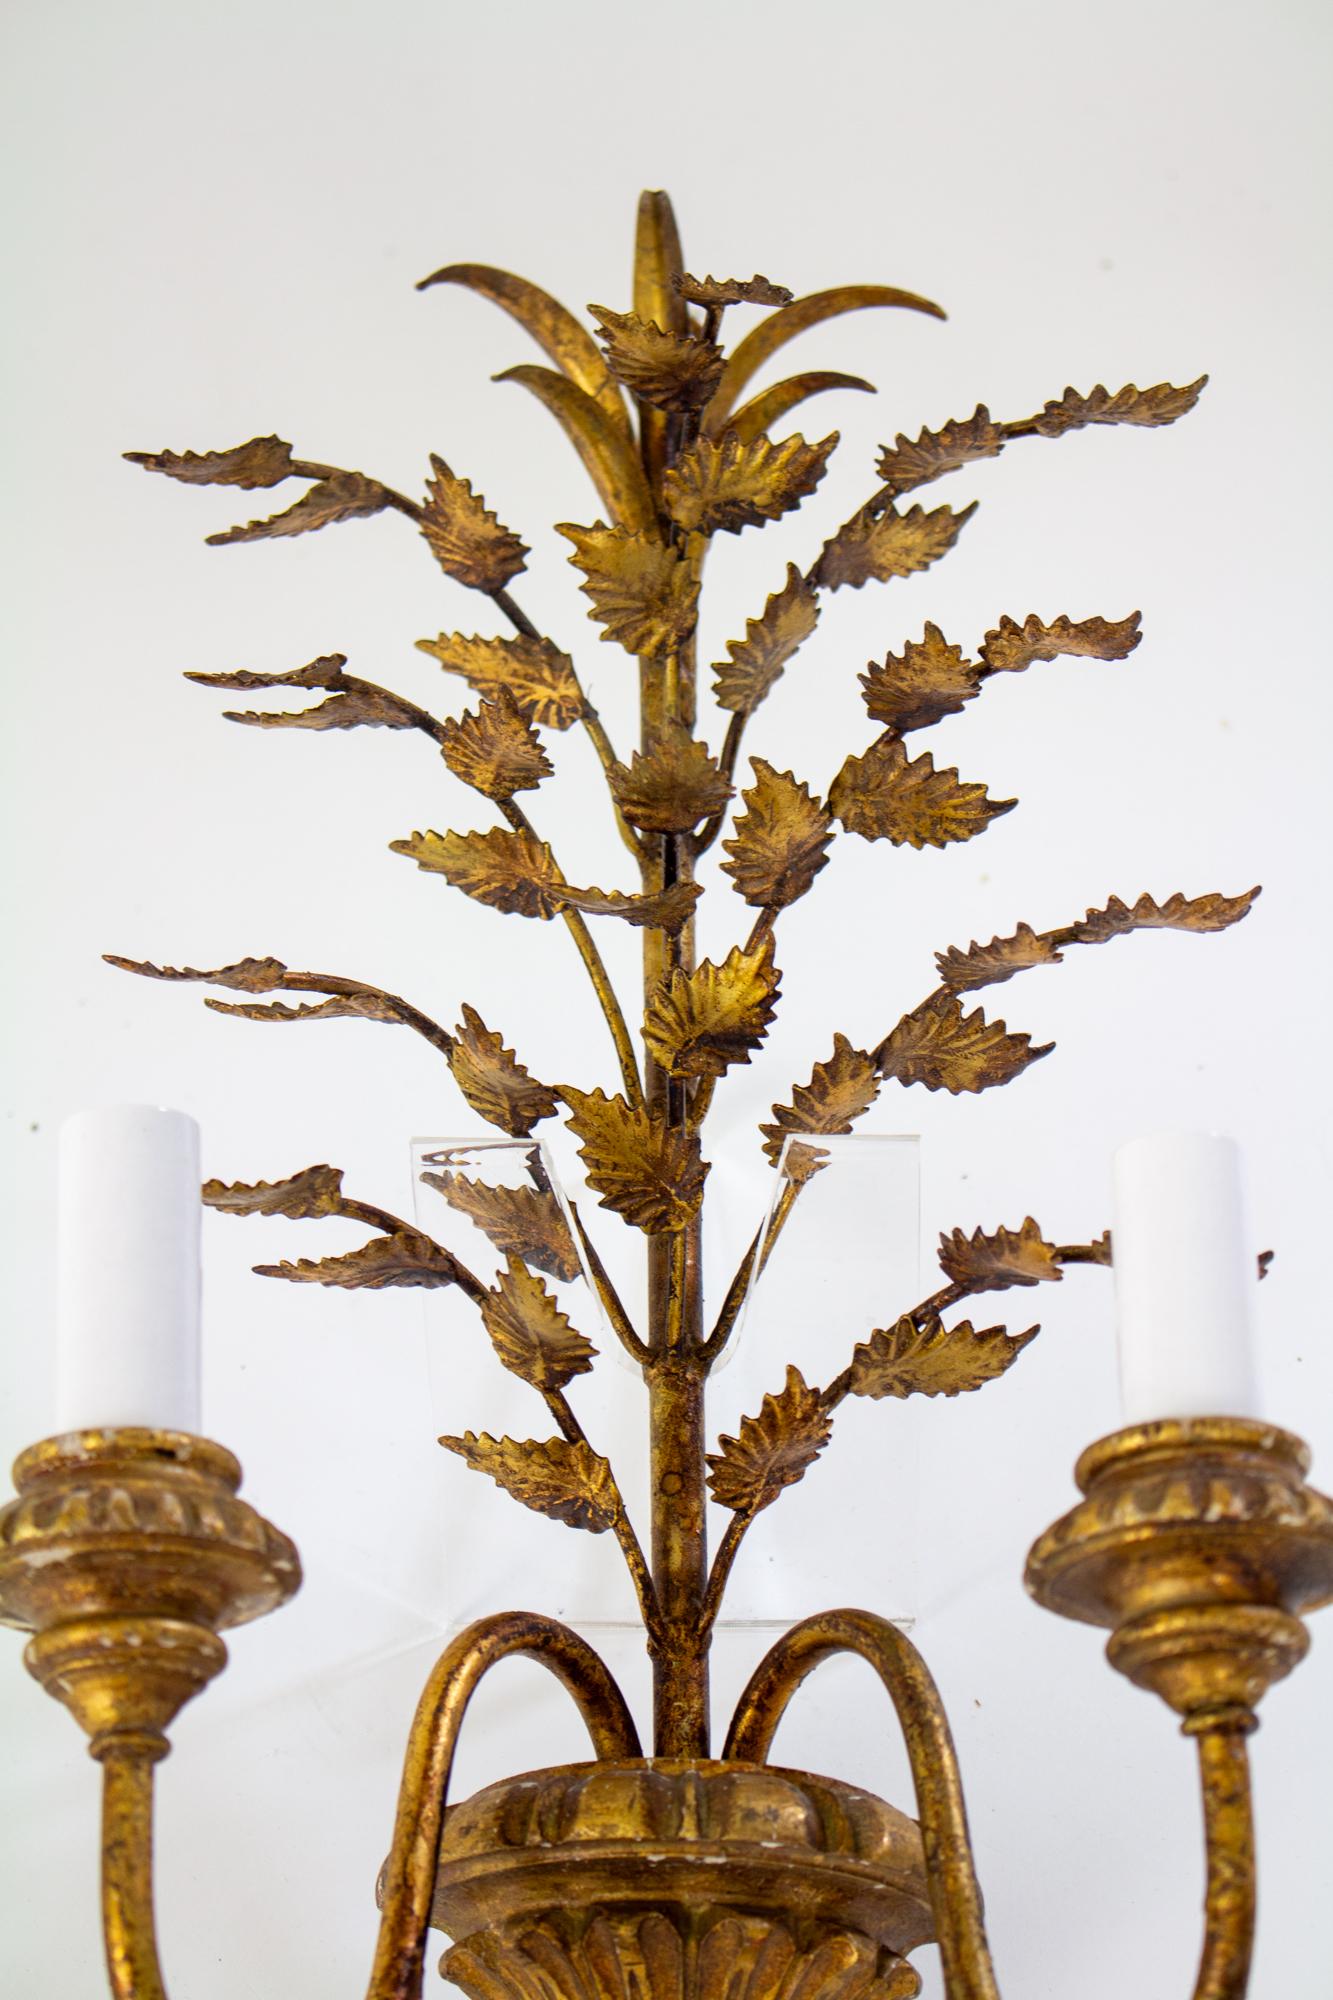 Hollywood Regency Mid 20th Century Italian Gilt Wood and Metal Leaf Sconces - a Pair For Sale